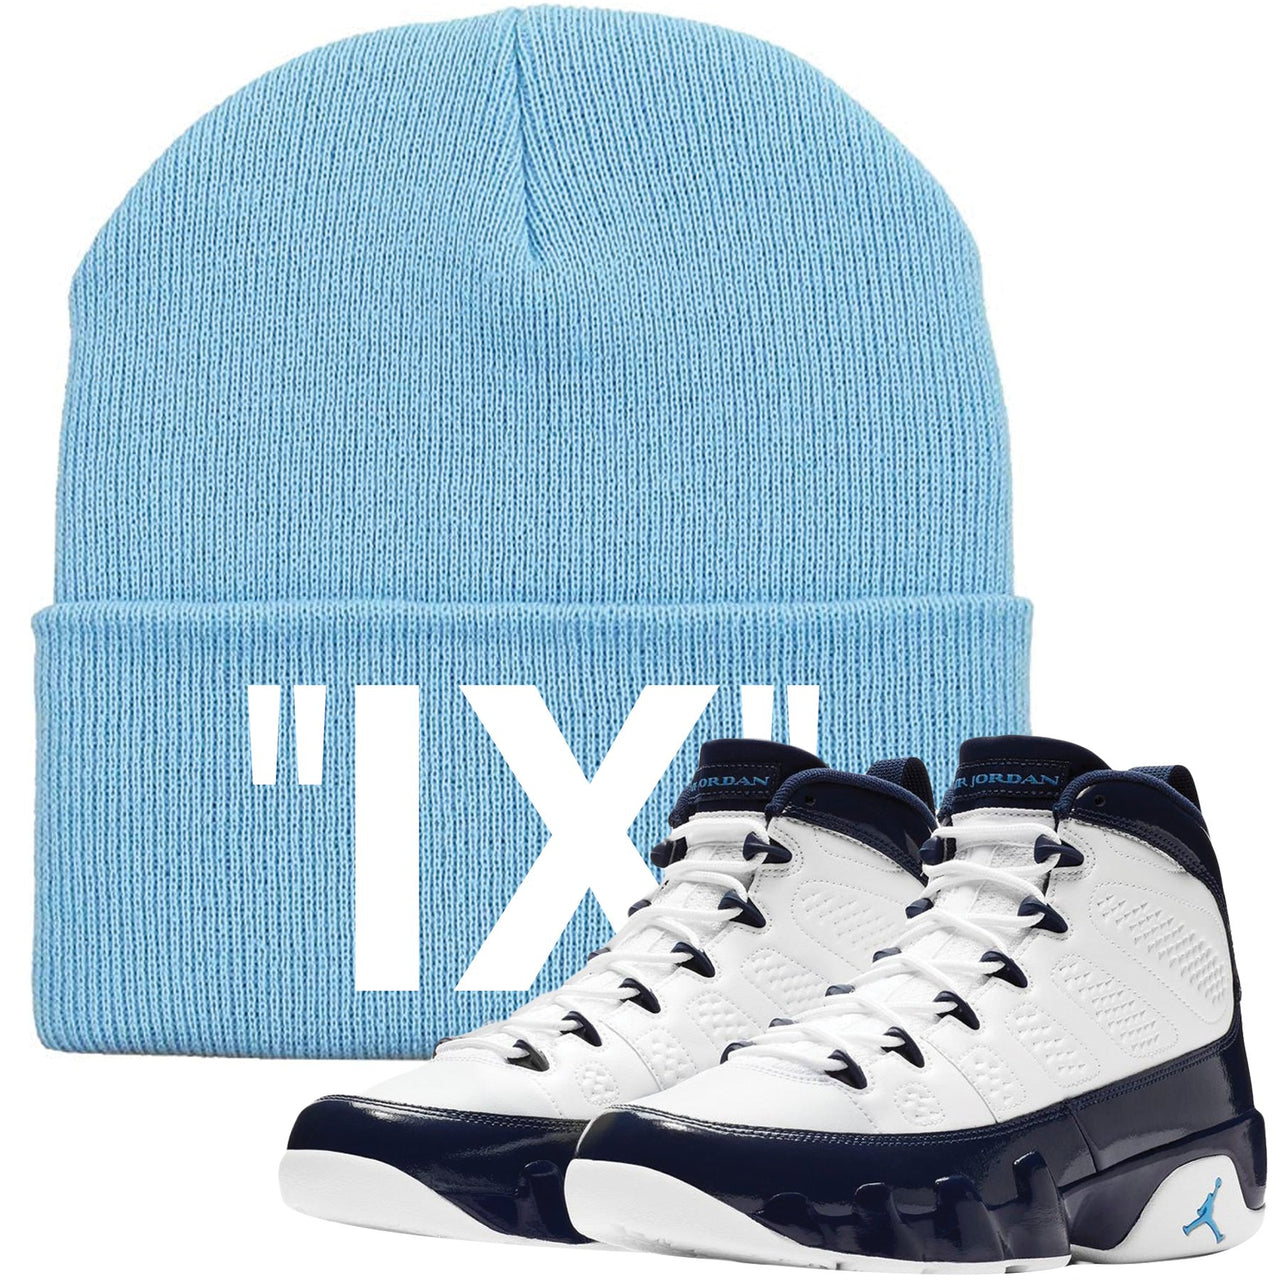 This Jordan 9 UNC All Star Blue Pearl sneaker matching winter beanie is perfect for matching the Jordan 9 UNC  Blue Pear sneakers